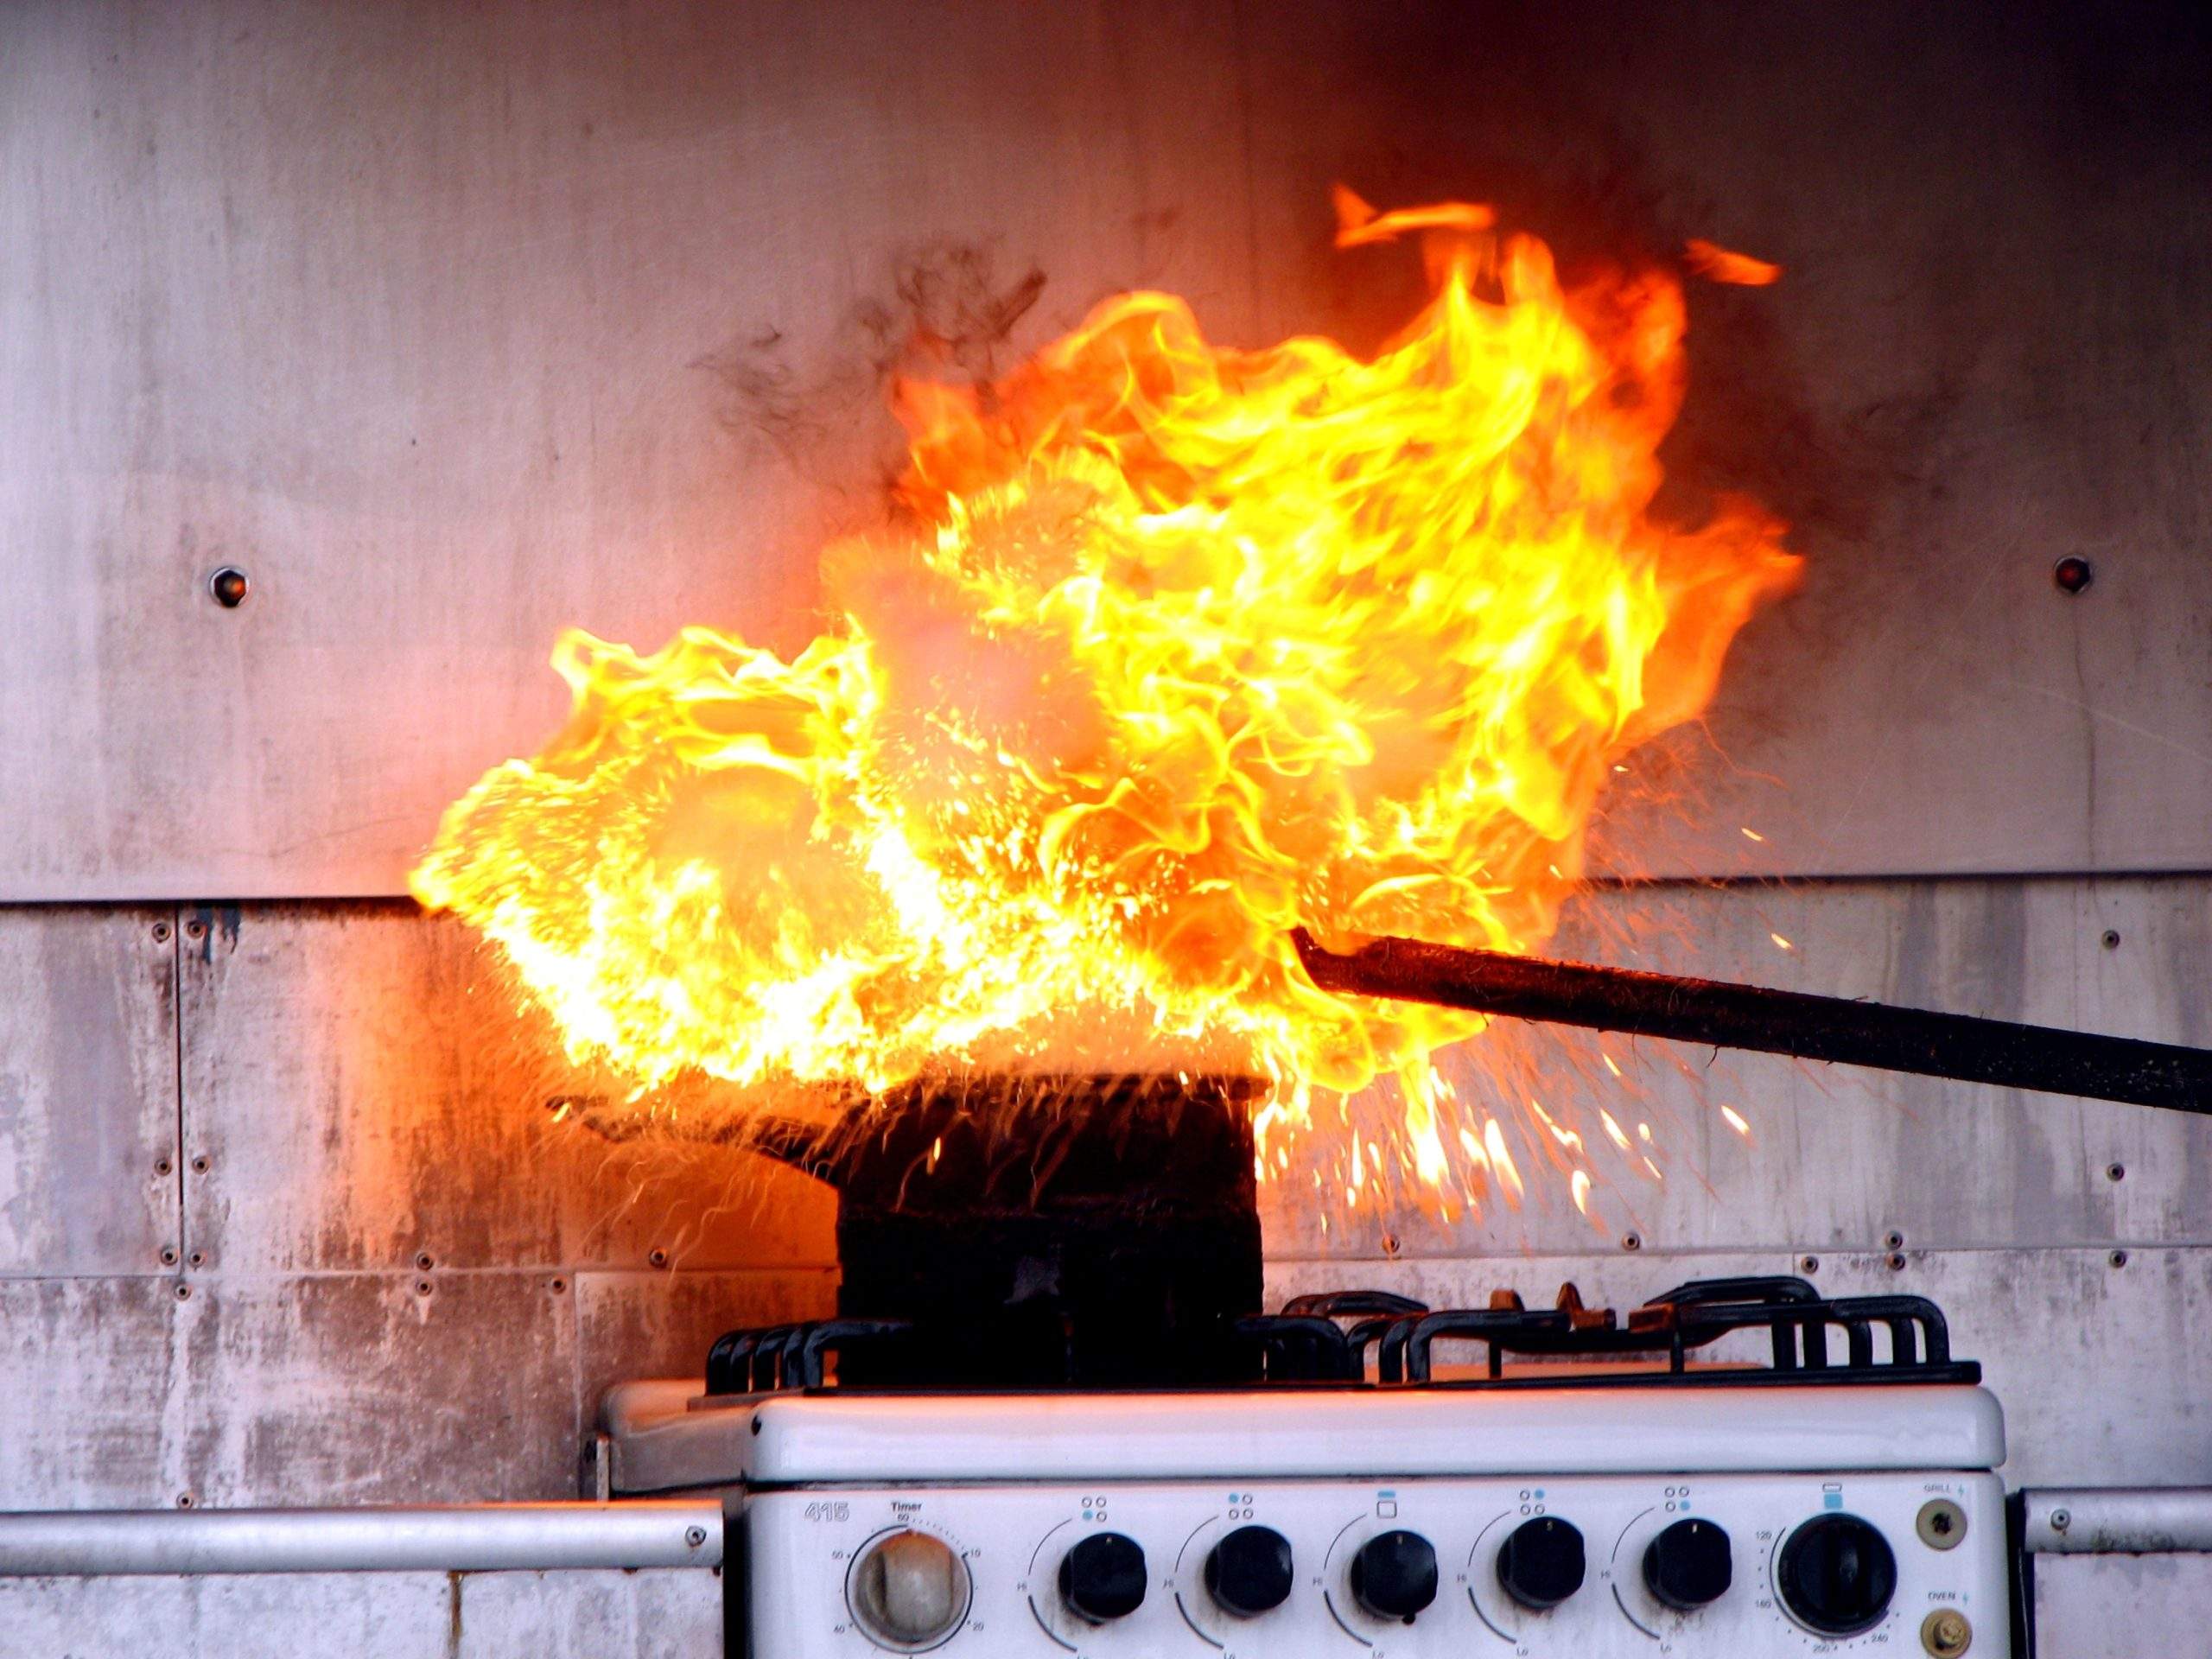 Is Your Industrial Oven a Fire Hazard?